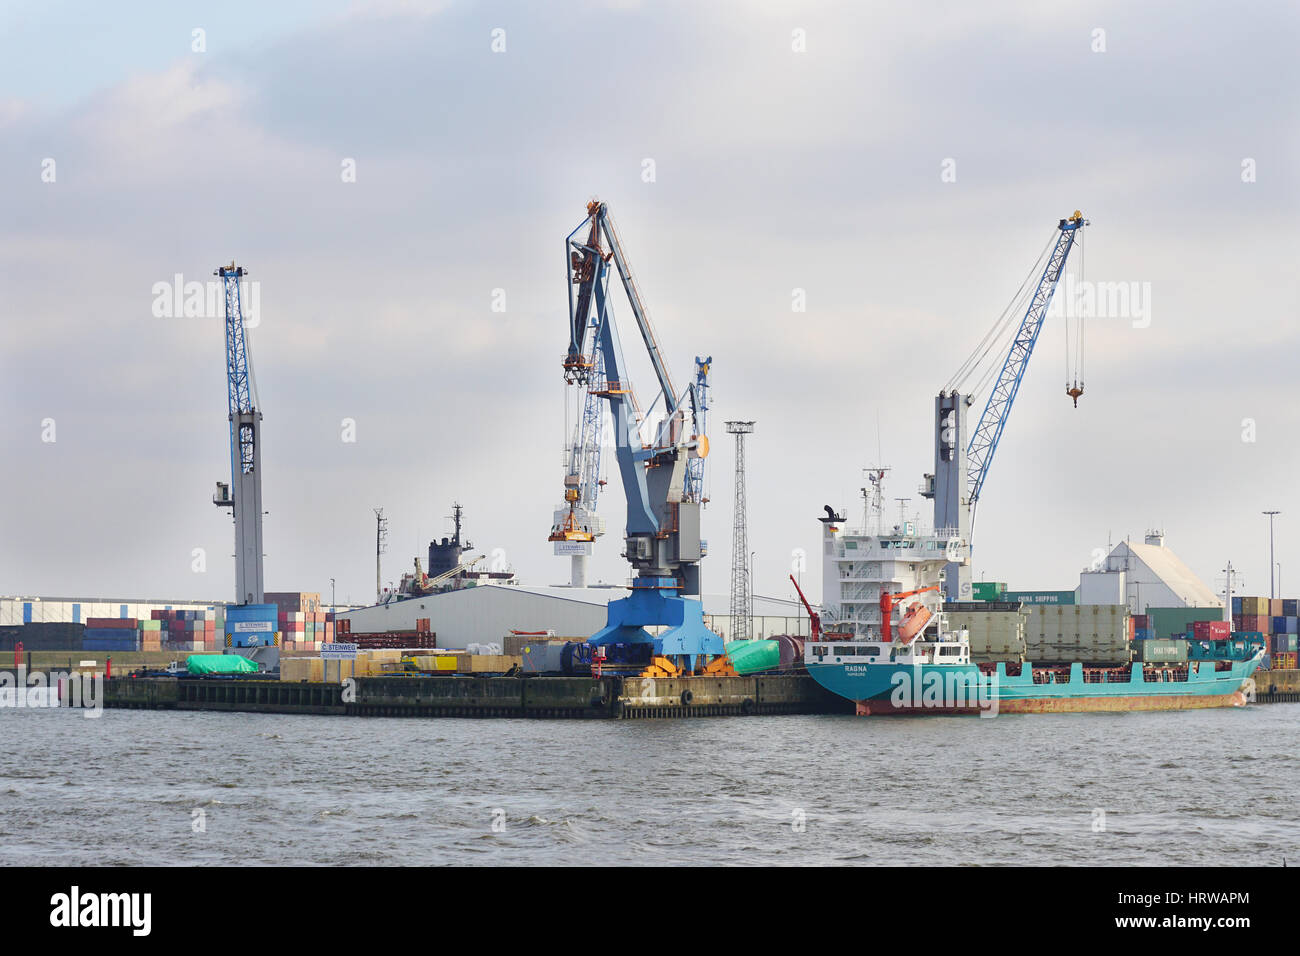 Hamburg, Germany - March 12, 2016: The Port of Hamburg (Hamburger Hafen) is Germany's largest and Europe's second busiest sea port after Rotterdam. Stock Photo